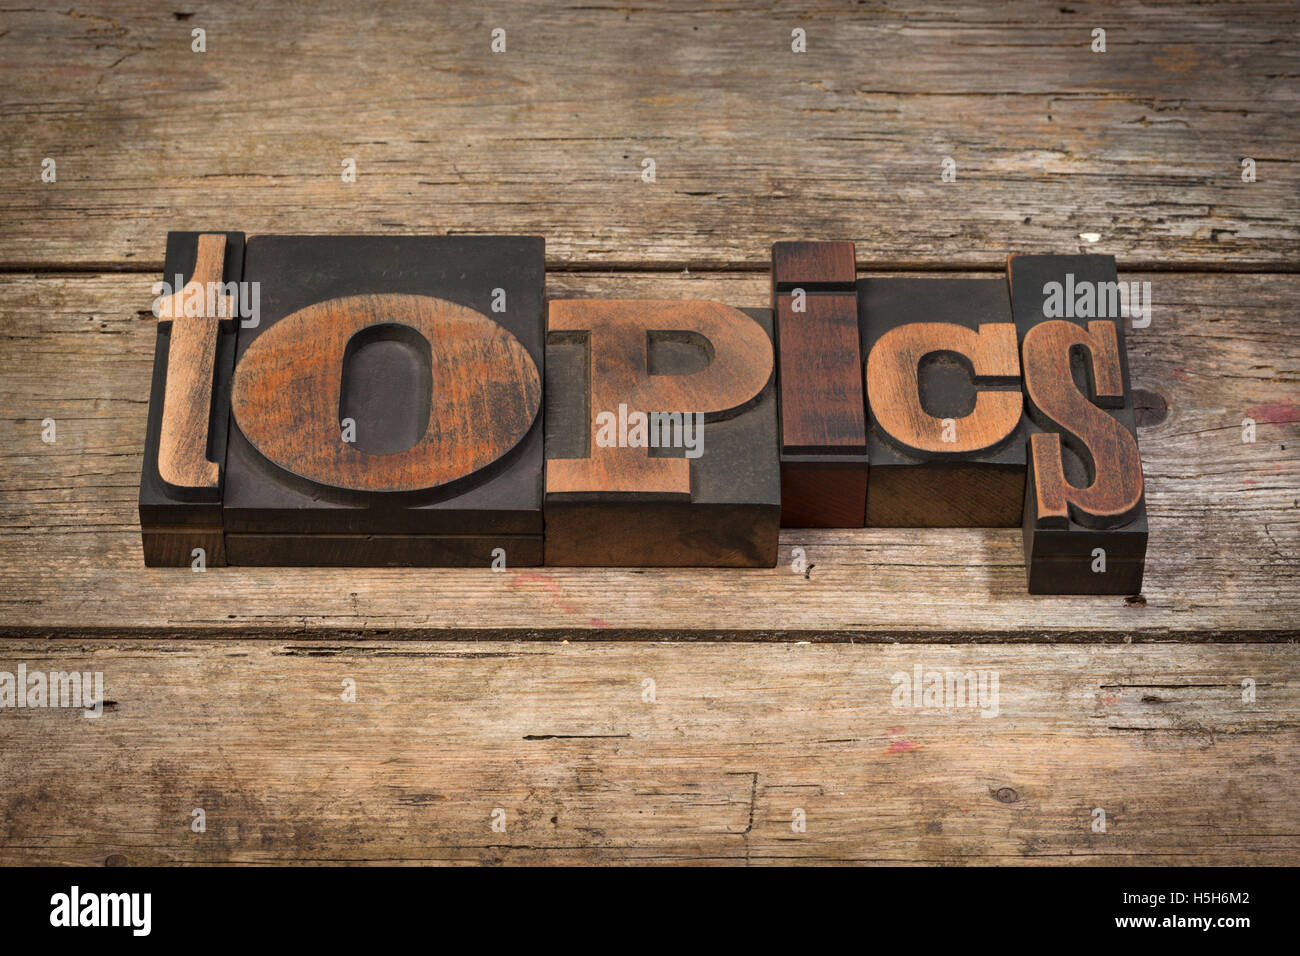 topics, word written with vintage letterpress printing blocks on rustic wooden background Stock Photo